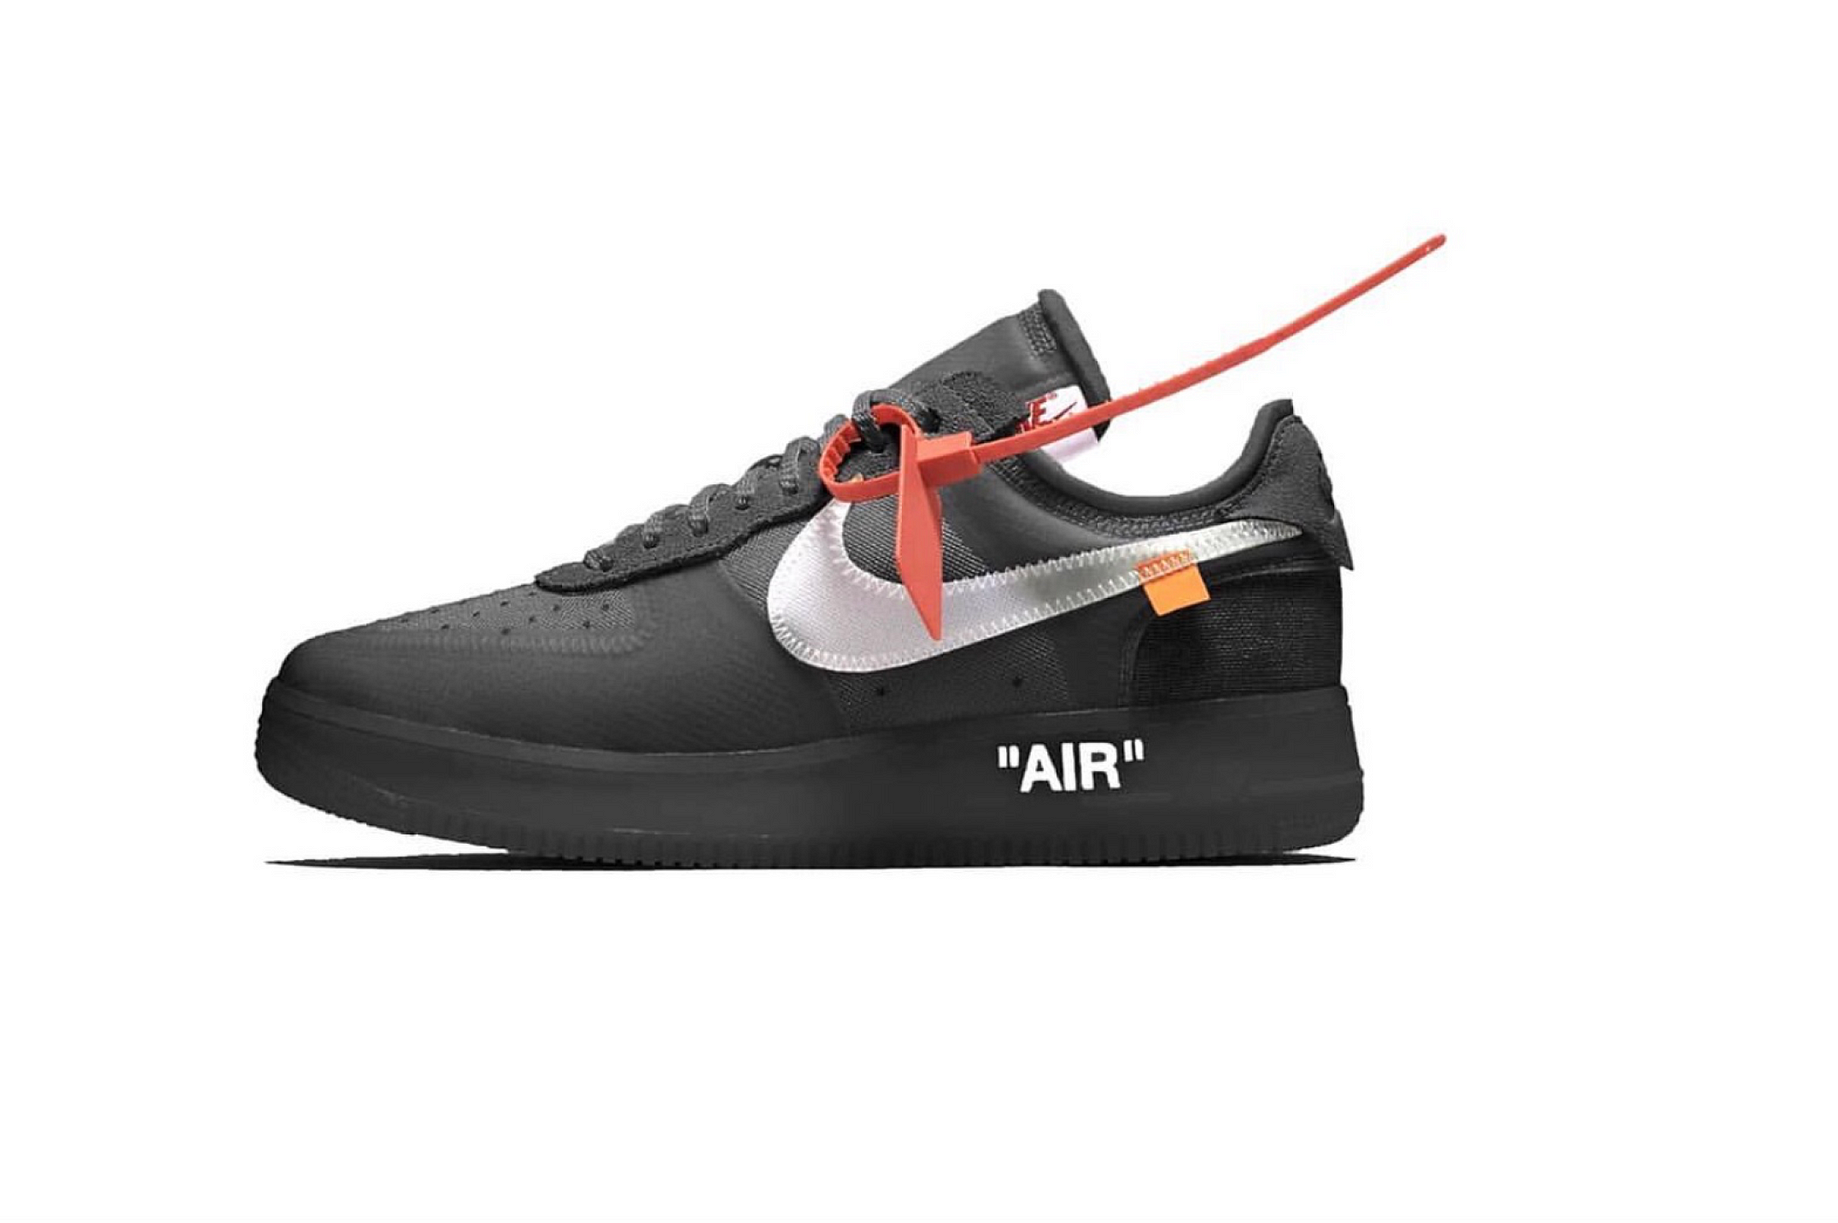 off white nike shoes red tag